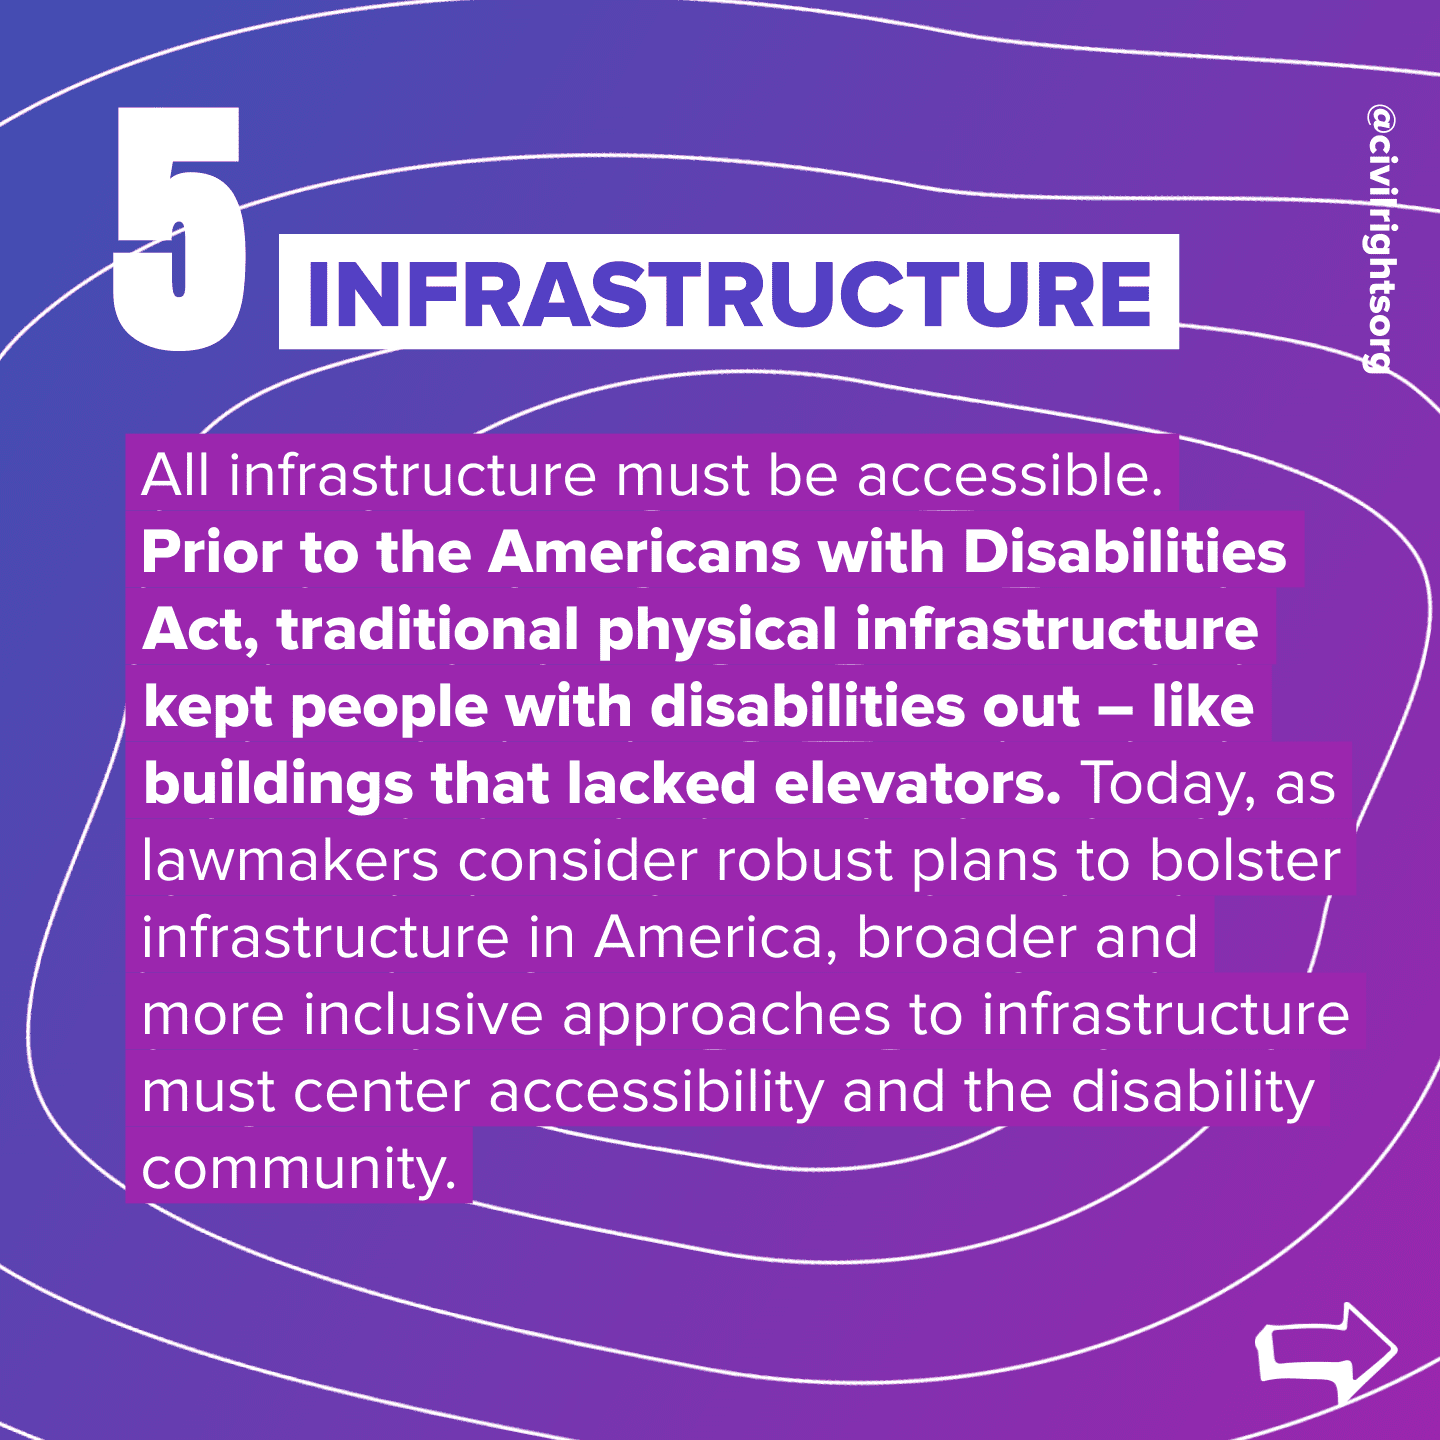 Number 5. Title “Infrastructure,” All infrastructure must be accessible. Prior to the Americans with Disabilities Act, traditional physical infrastructure kept people with disabilities out – like buildings that lacked elevators. Today, as lawmakers consider robust plans to bolster infrastructure in America, broader and more inclusive approaches to infrastructure must center accessibility and the disability community. Swipe right arrow.